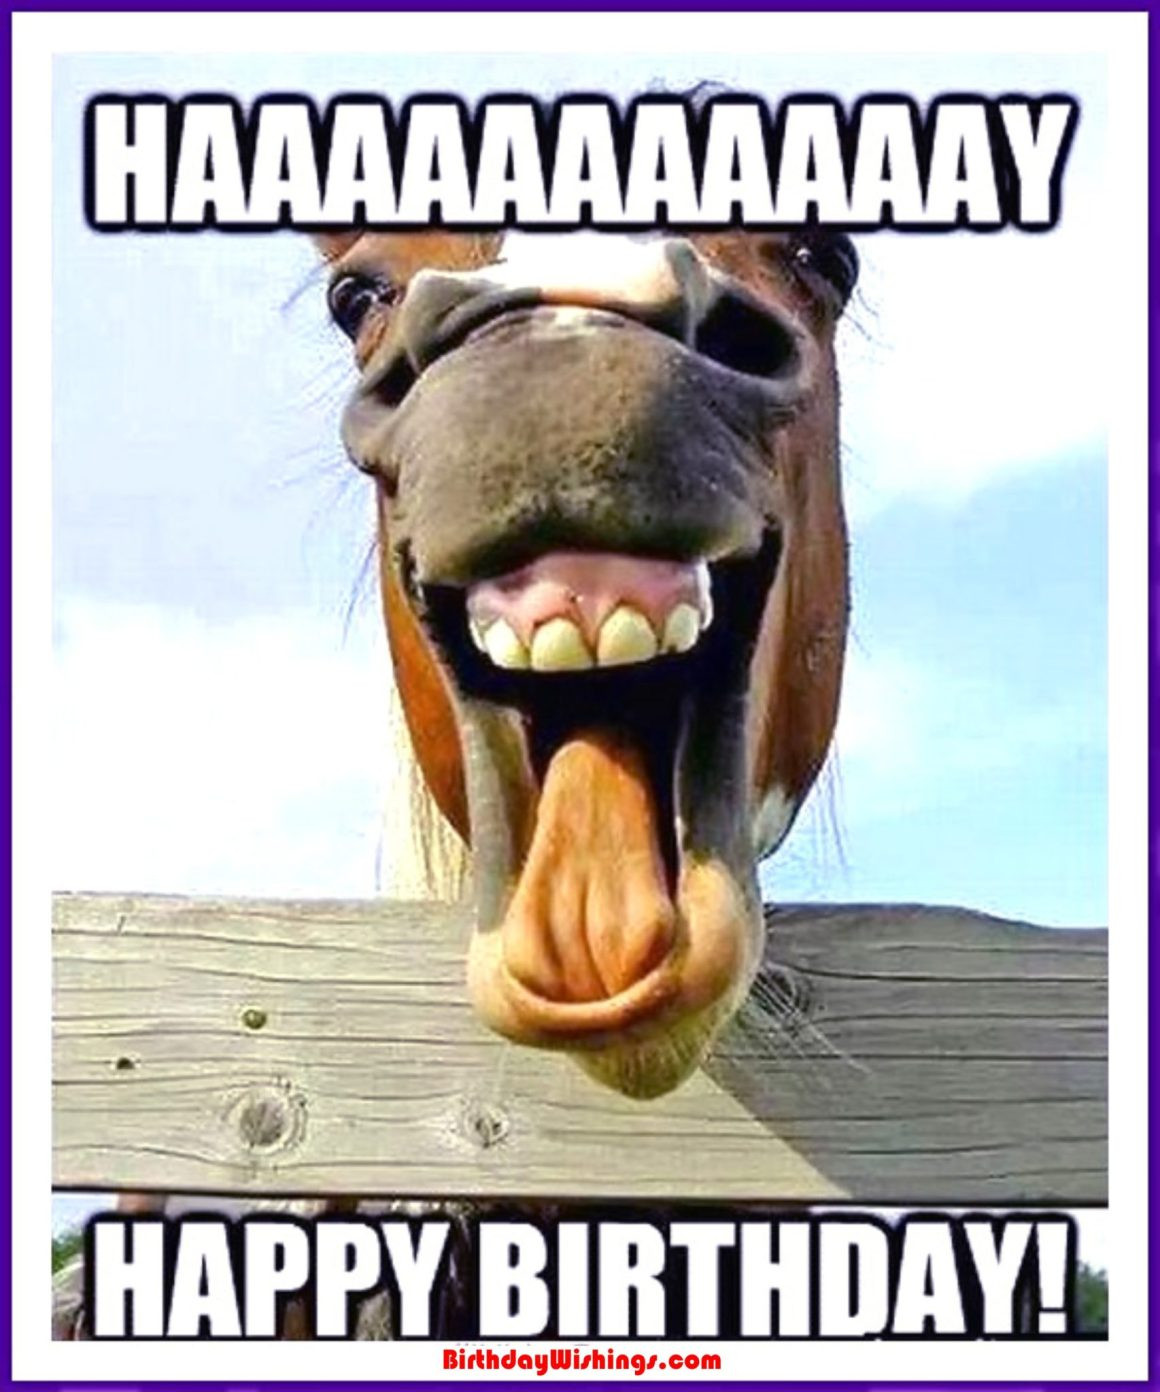 Funny Happy Birthday Meme
 Funny Happy Birthday Memes With cats Dogs & Funny Animals